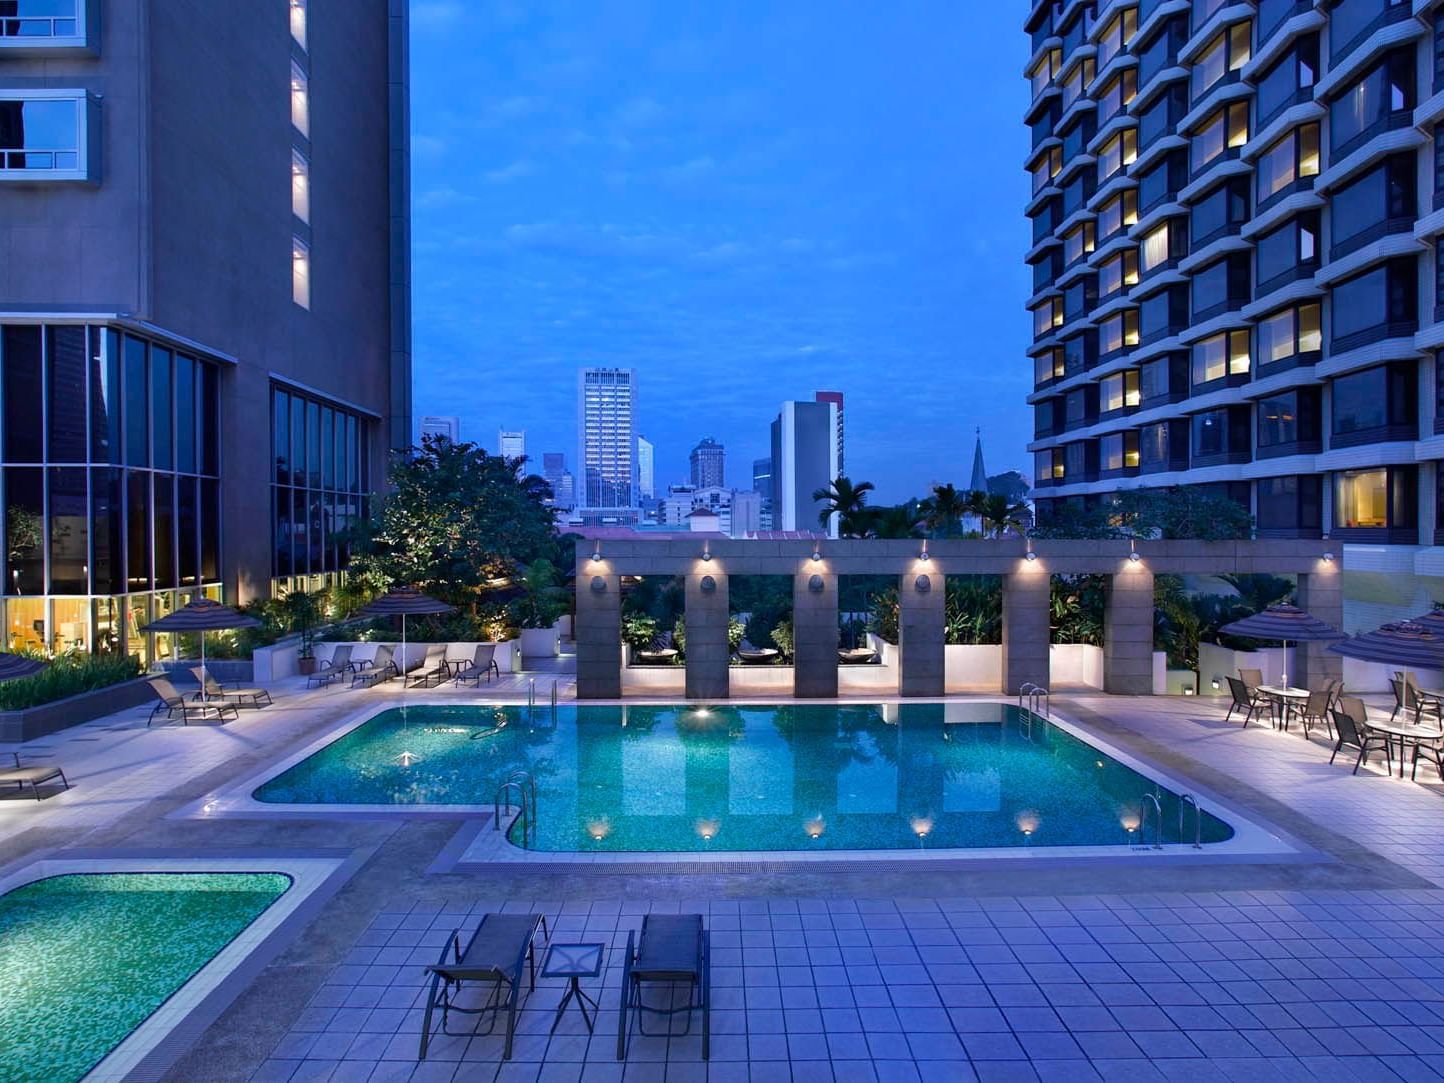 Outdoor swimming pool area at night in Carlton Hotel Singapore